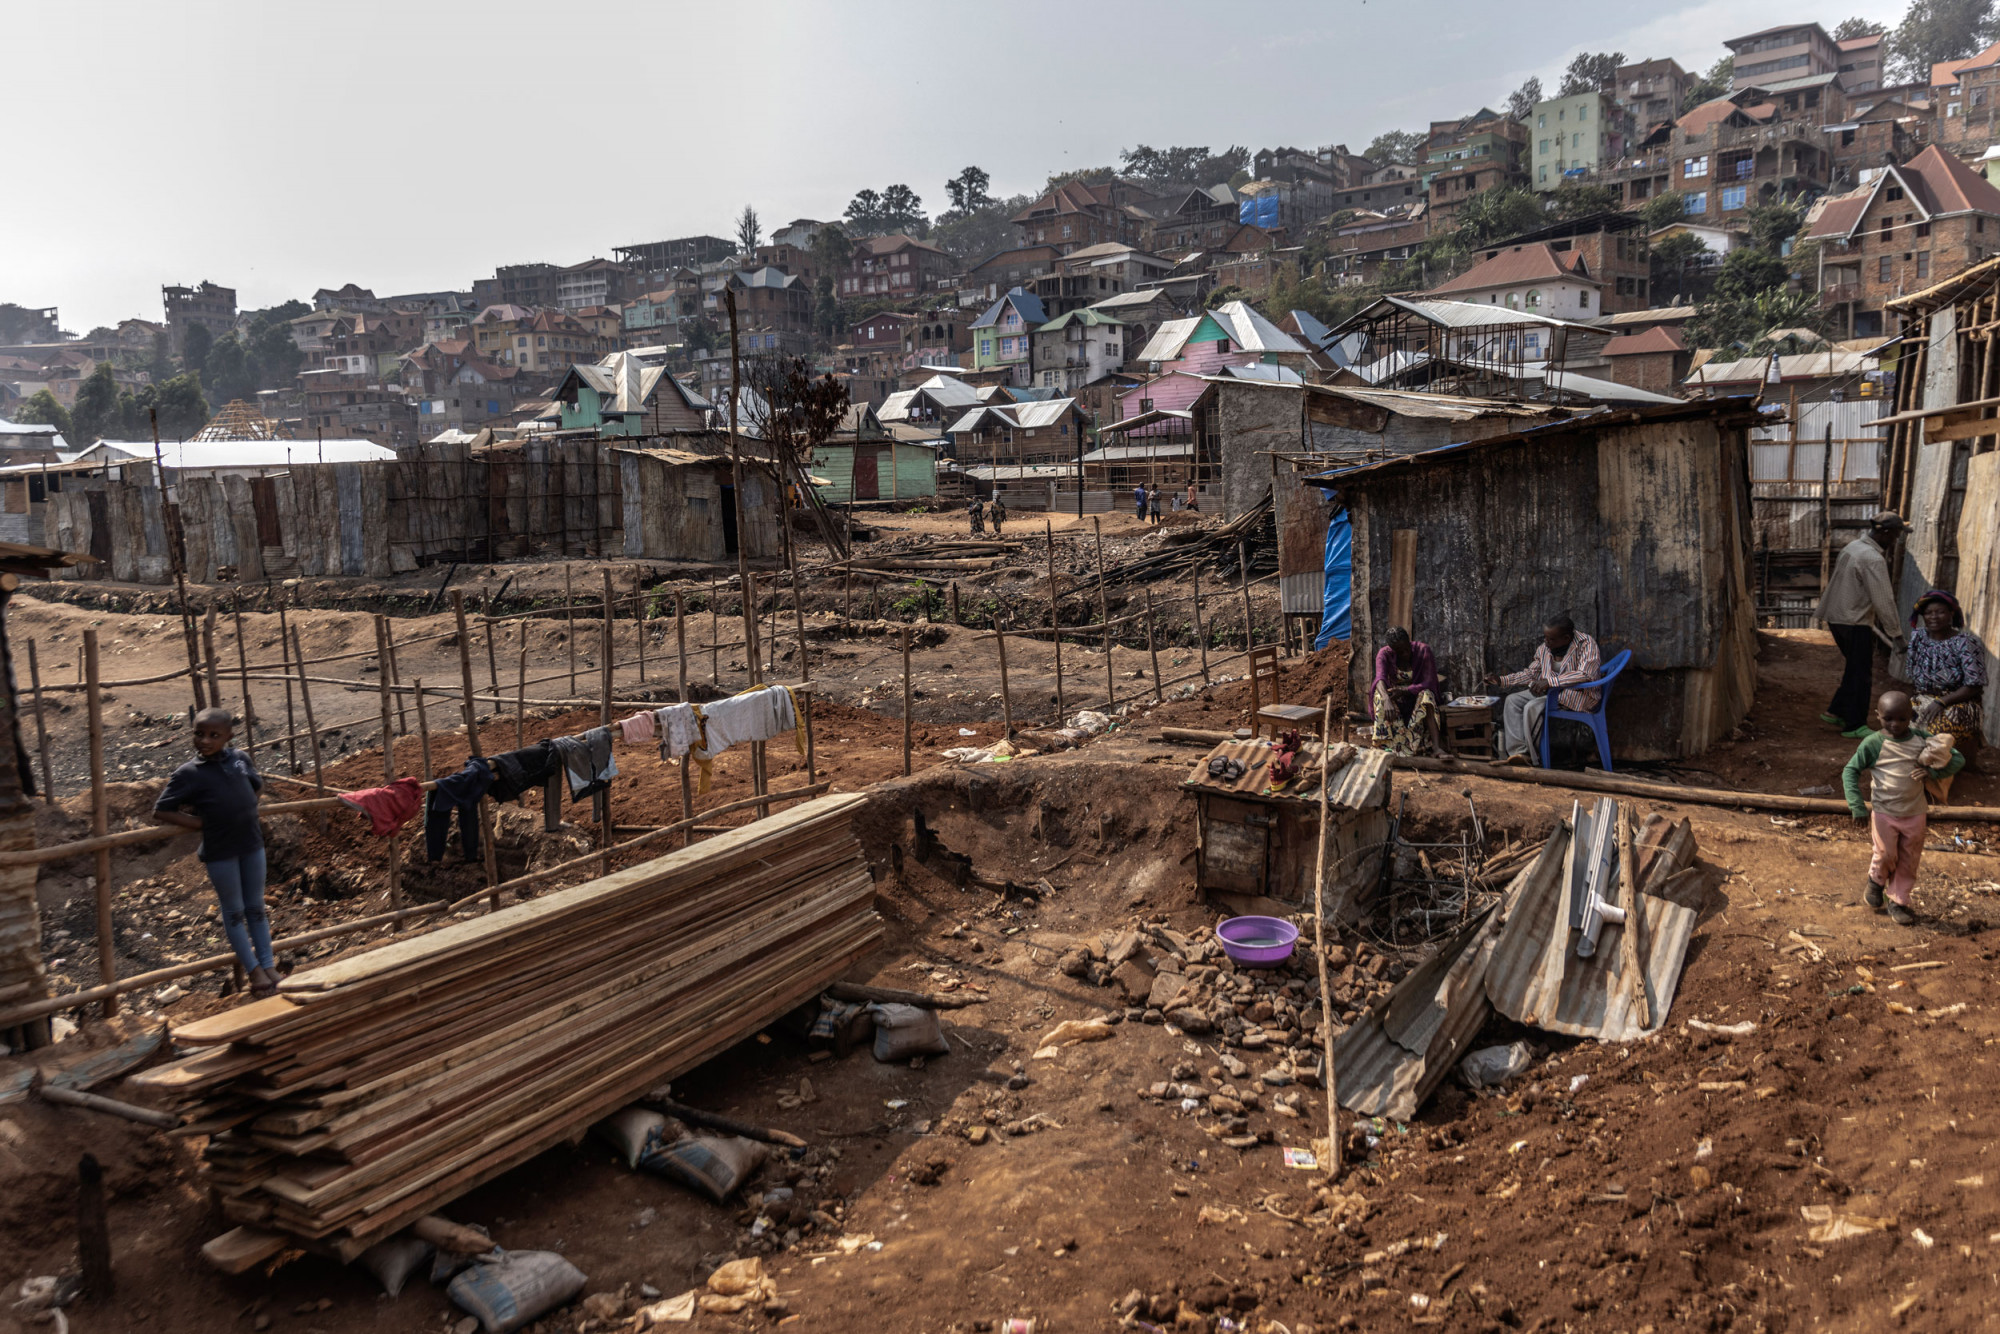 Bukavu, South Kivu, September 6, 2021. After a fire that destroyed at least 400 houses, the community is trying to rebuild the houses with boards. © Guerchom Ndebo for Fondation Carmignac